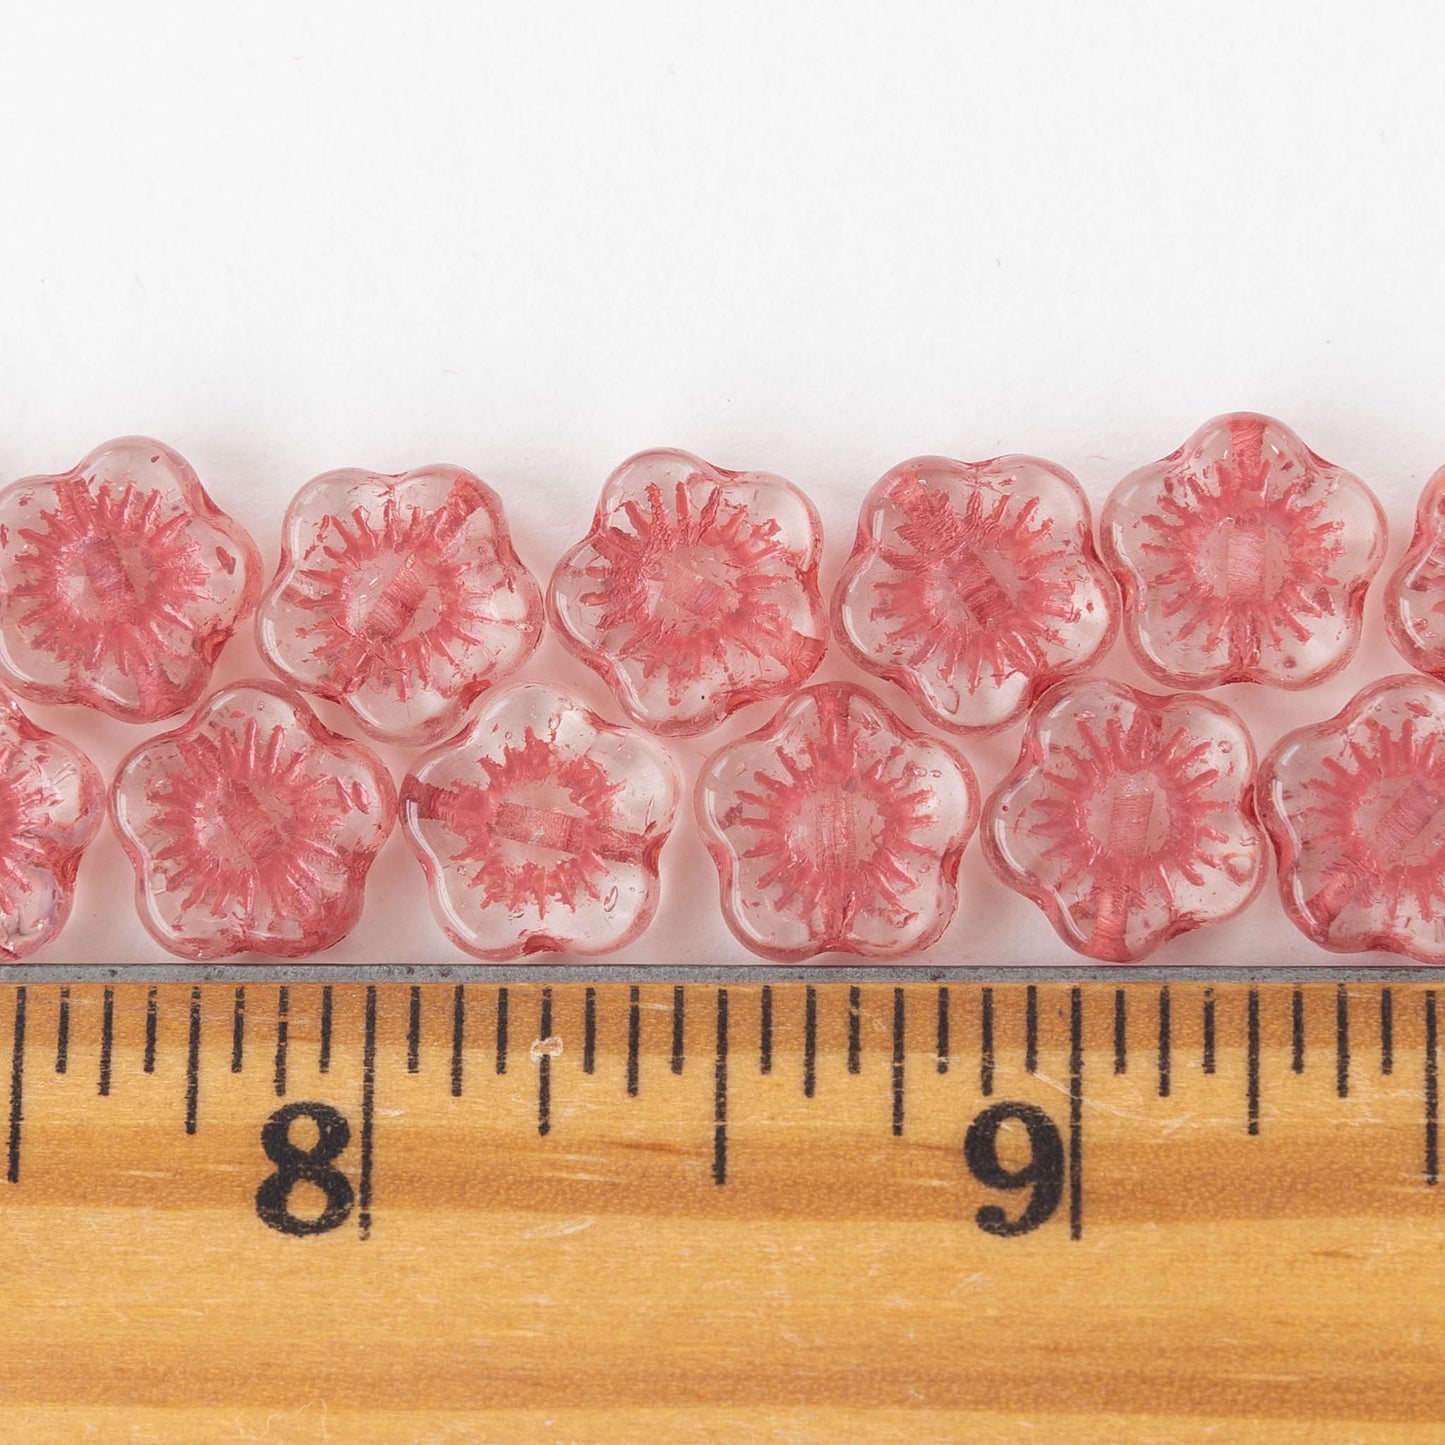 Load image into Gallery viewer, 10mm Glass Flower Beads - Crystal with Pink Wash - 20 beads
